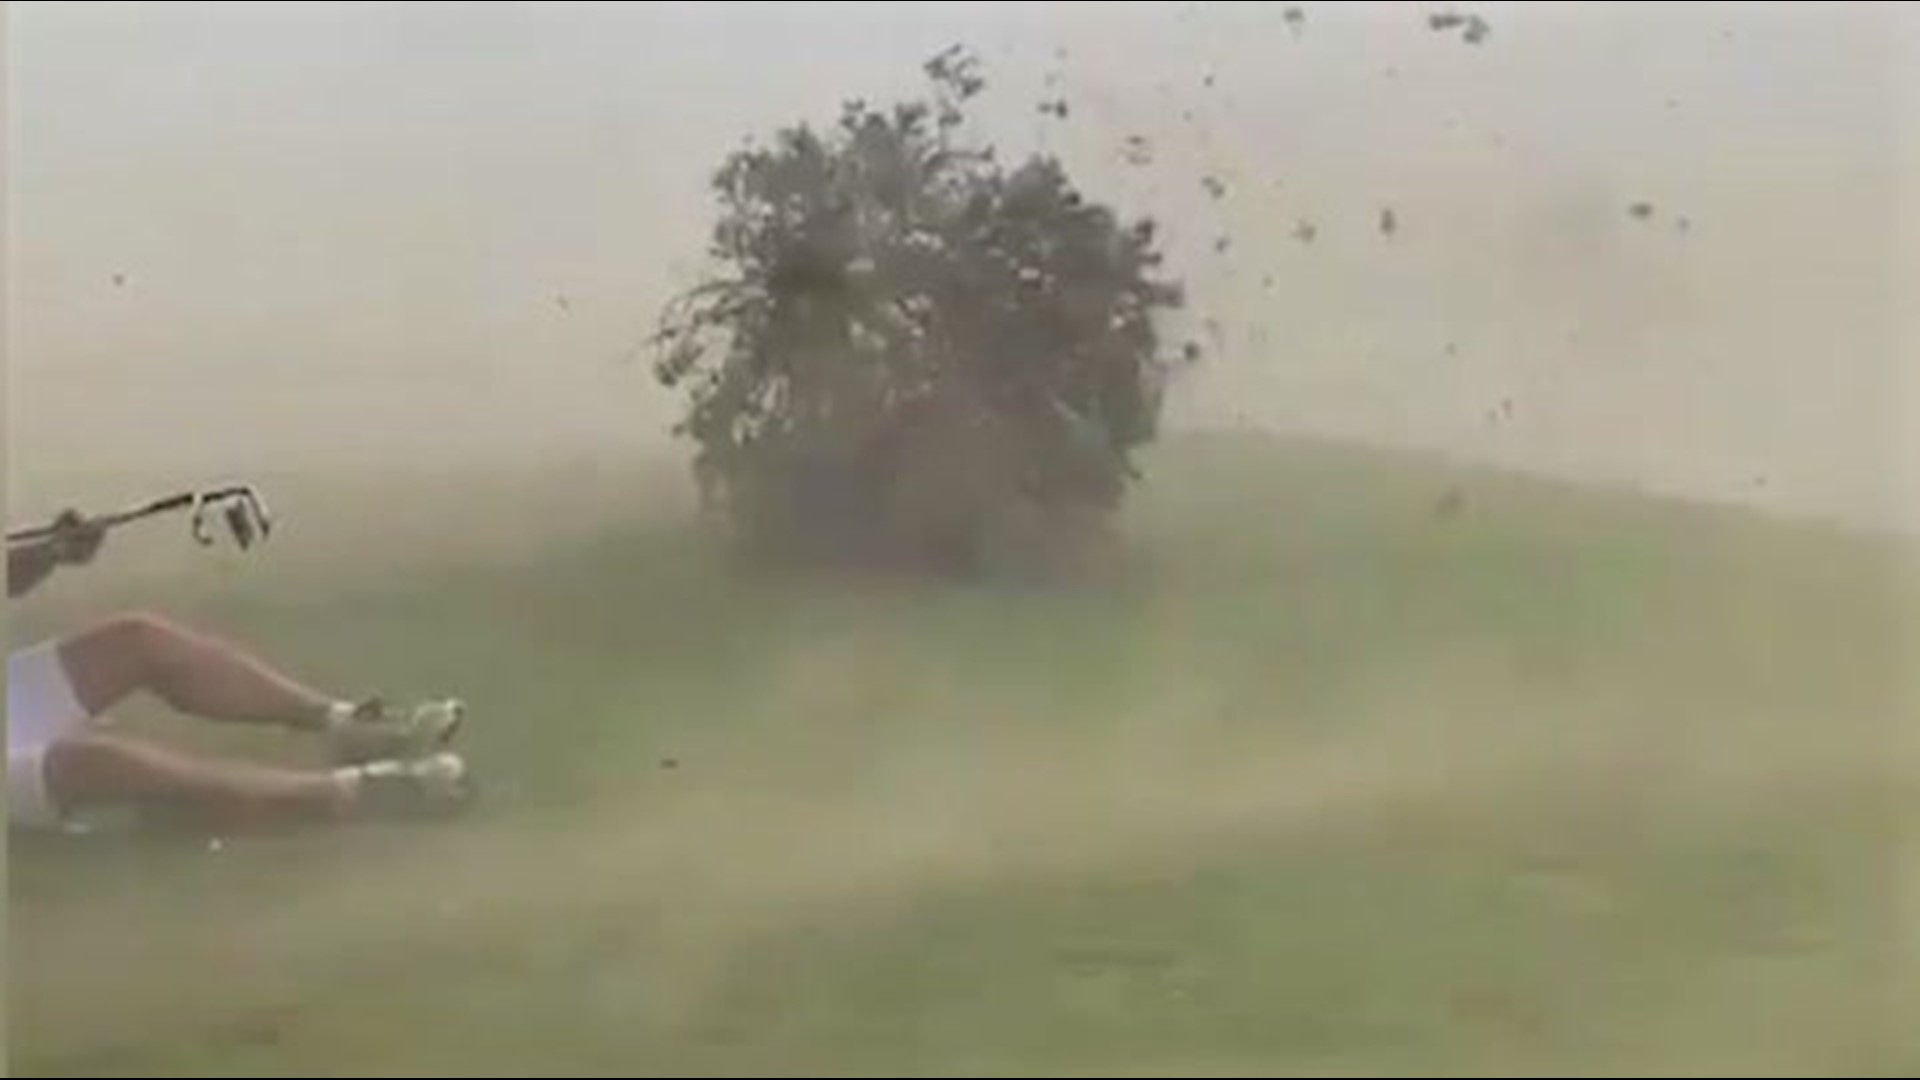 A couple of guys were just enjoying a day out on the golf course at The Els Club in Dubai, United Arab Emirates, on May 24, when they were hit with crosswinds.